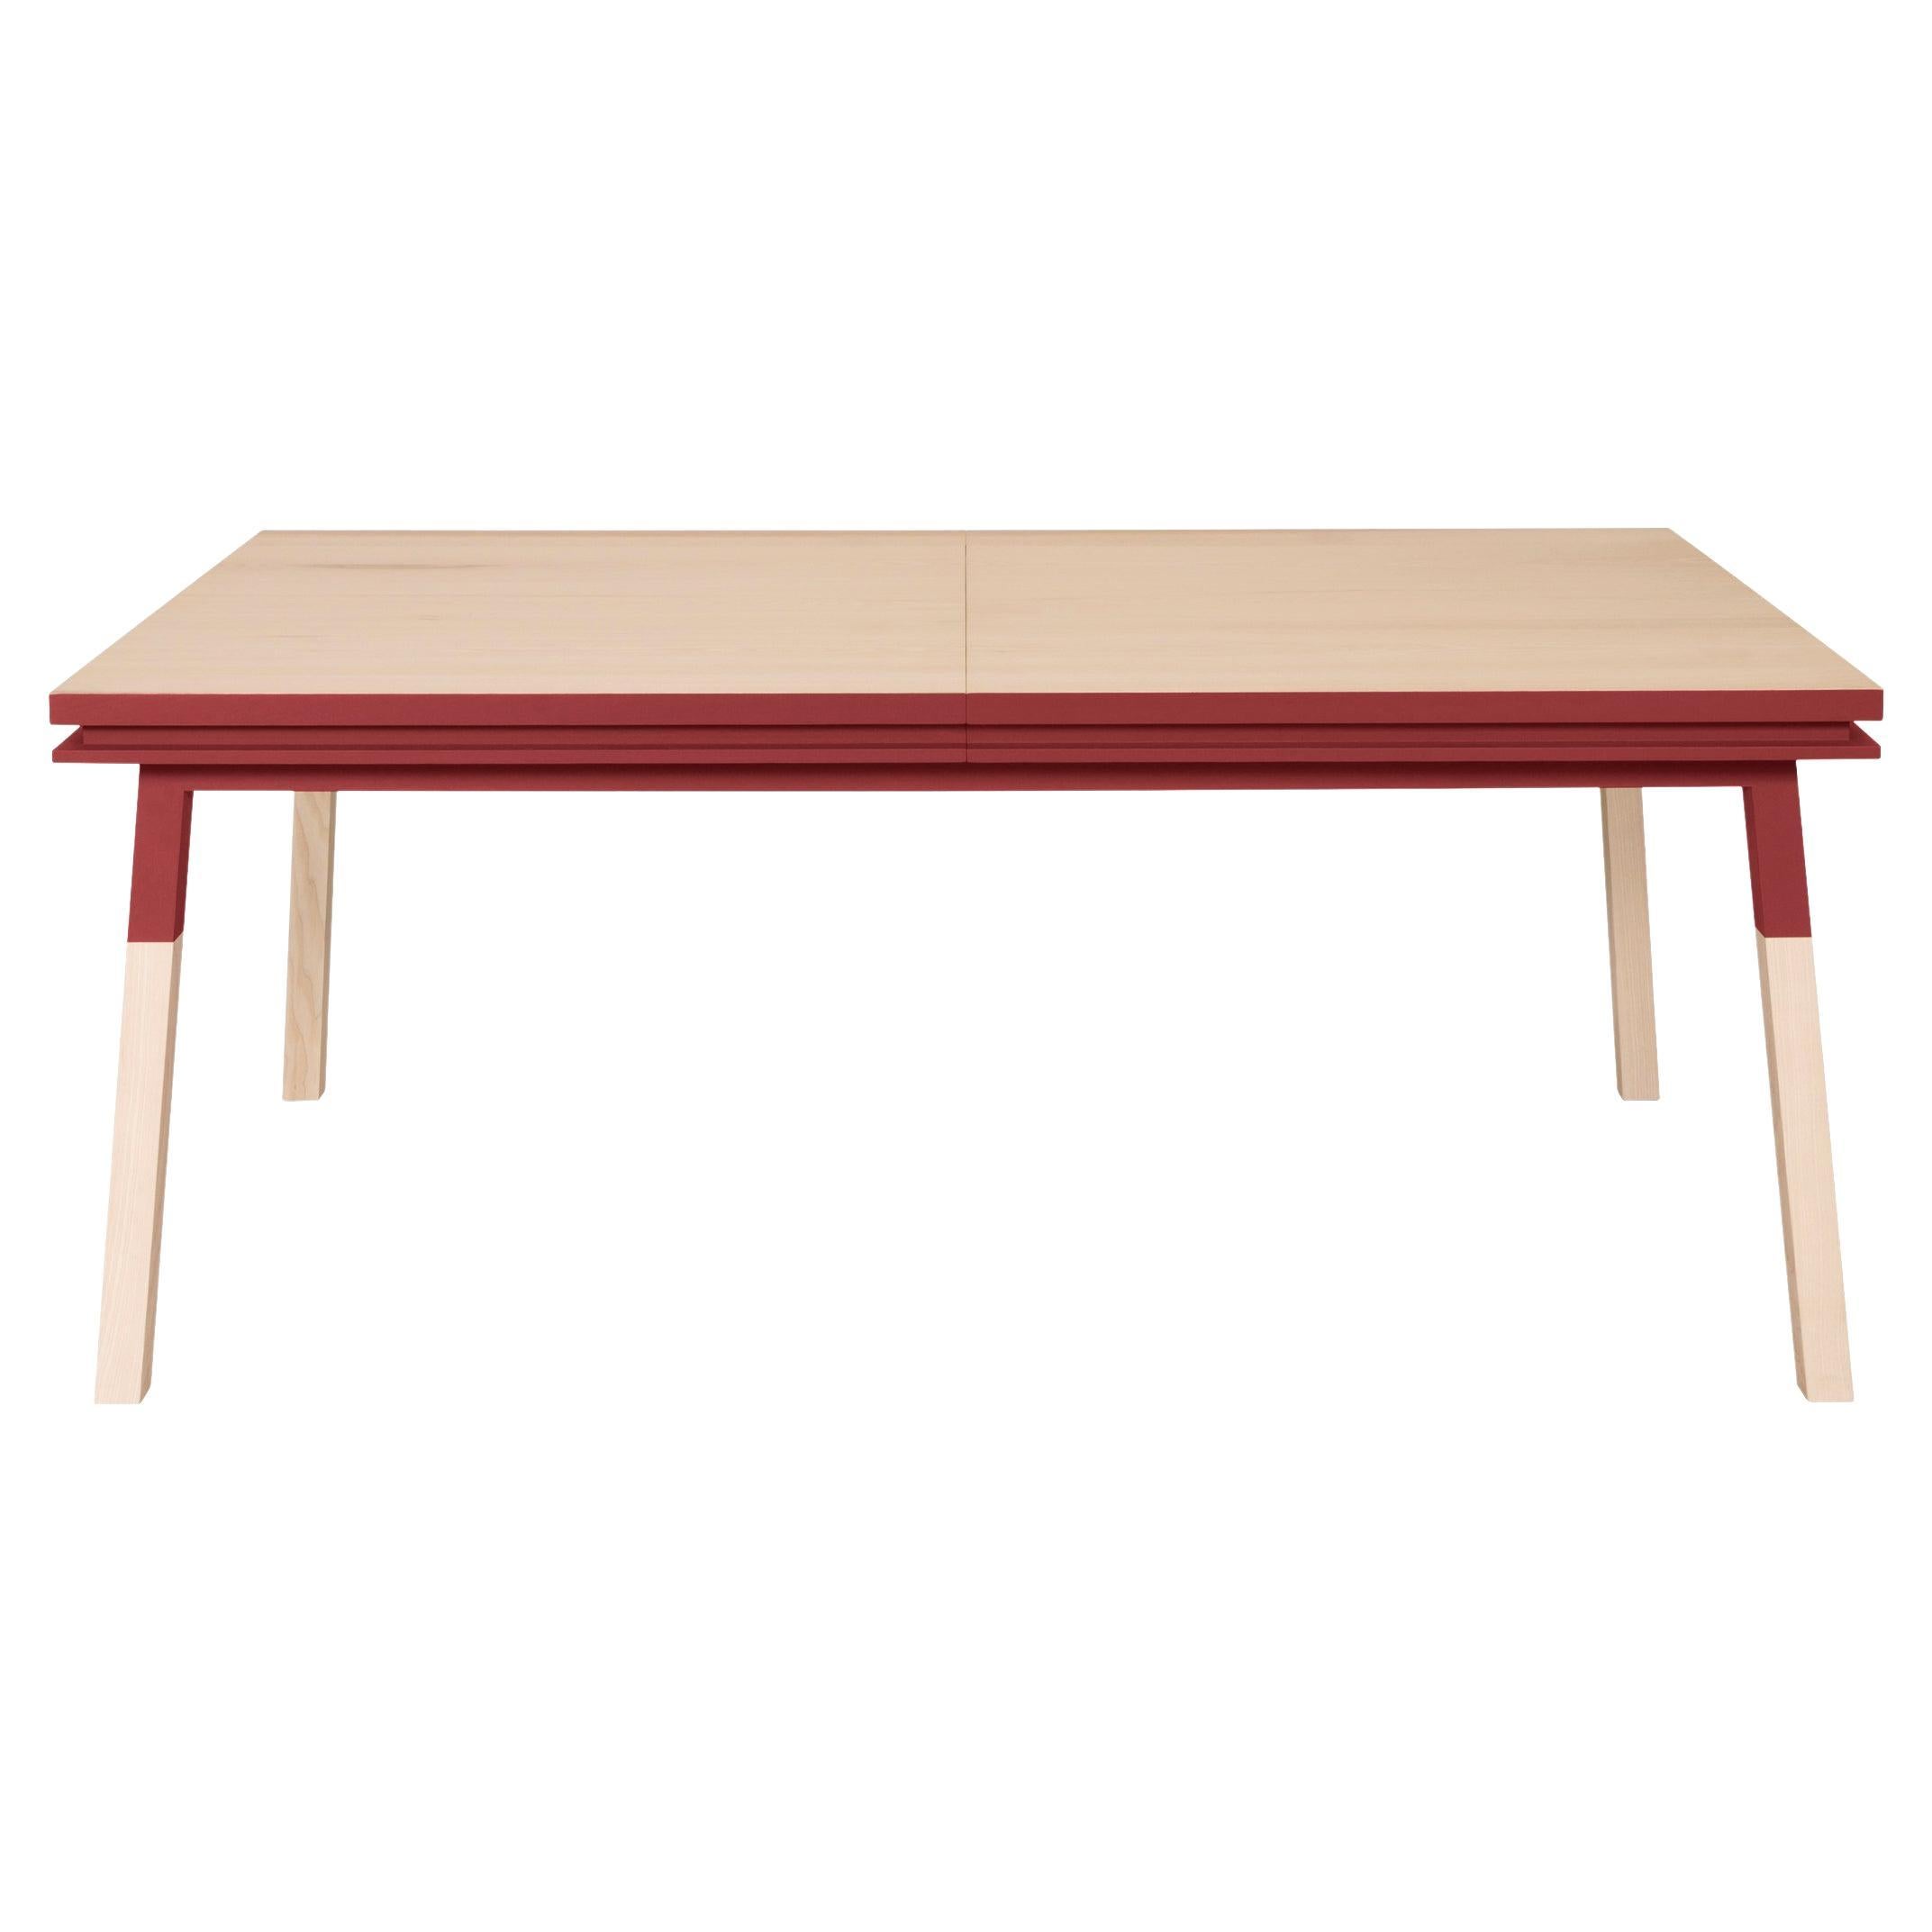 Red & natural wood extensible dining table in solid wood, design E. Gizard